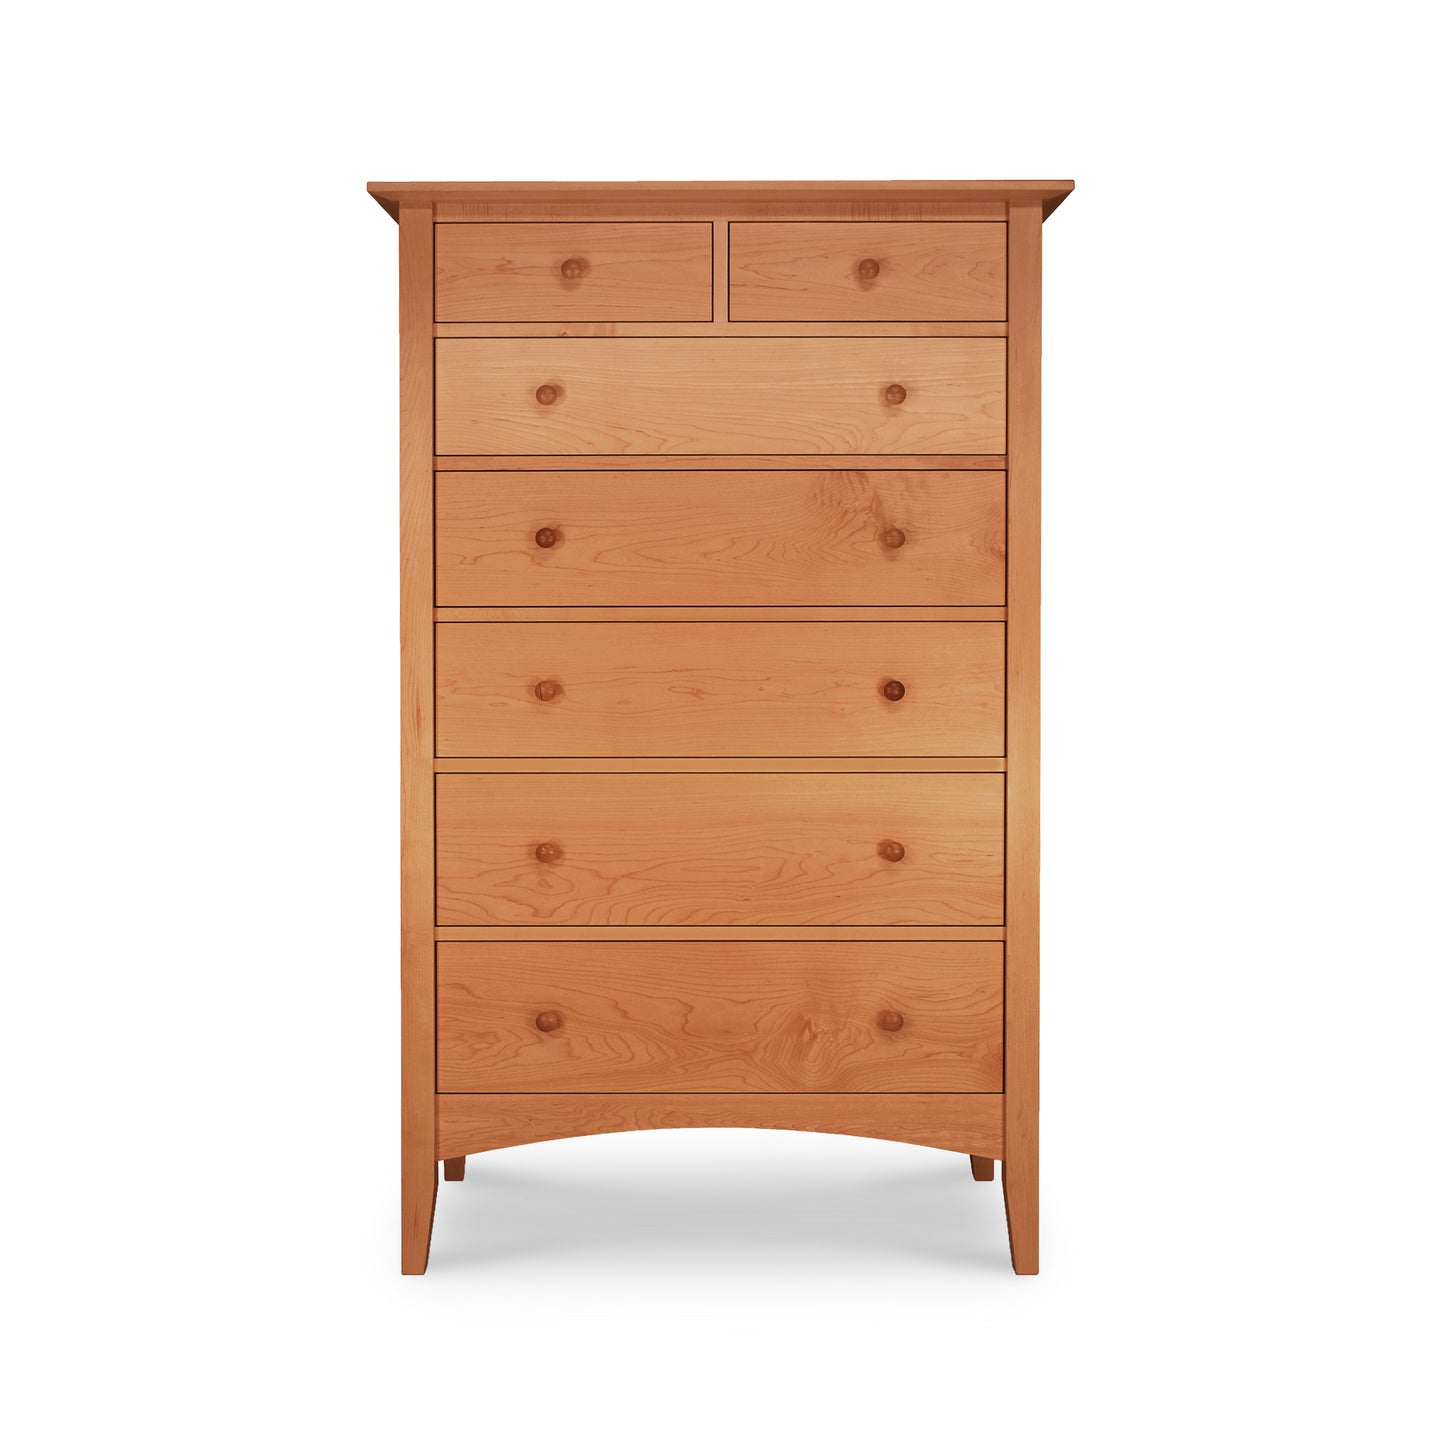 A tall wooden American Shaker 7-Drawer Chest from the Maple Corner Woodworks Collection, featuring a simple design and light brown finish, positioned against a plain white background.